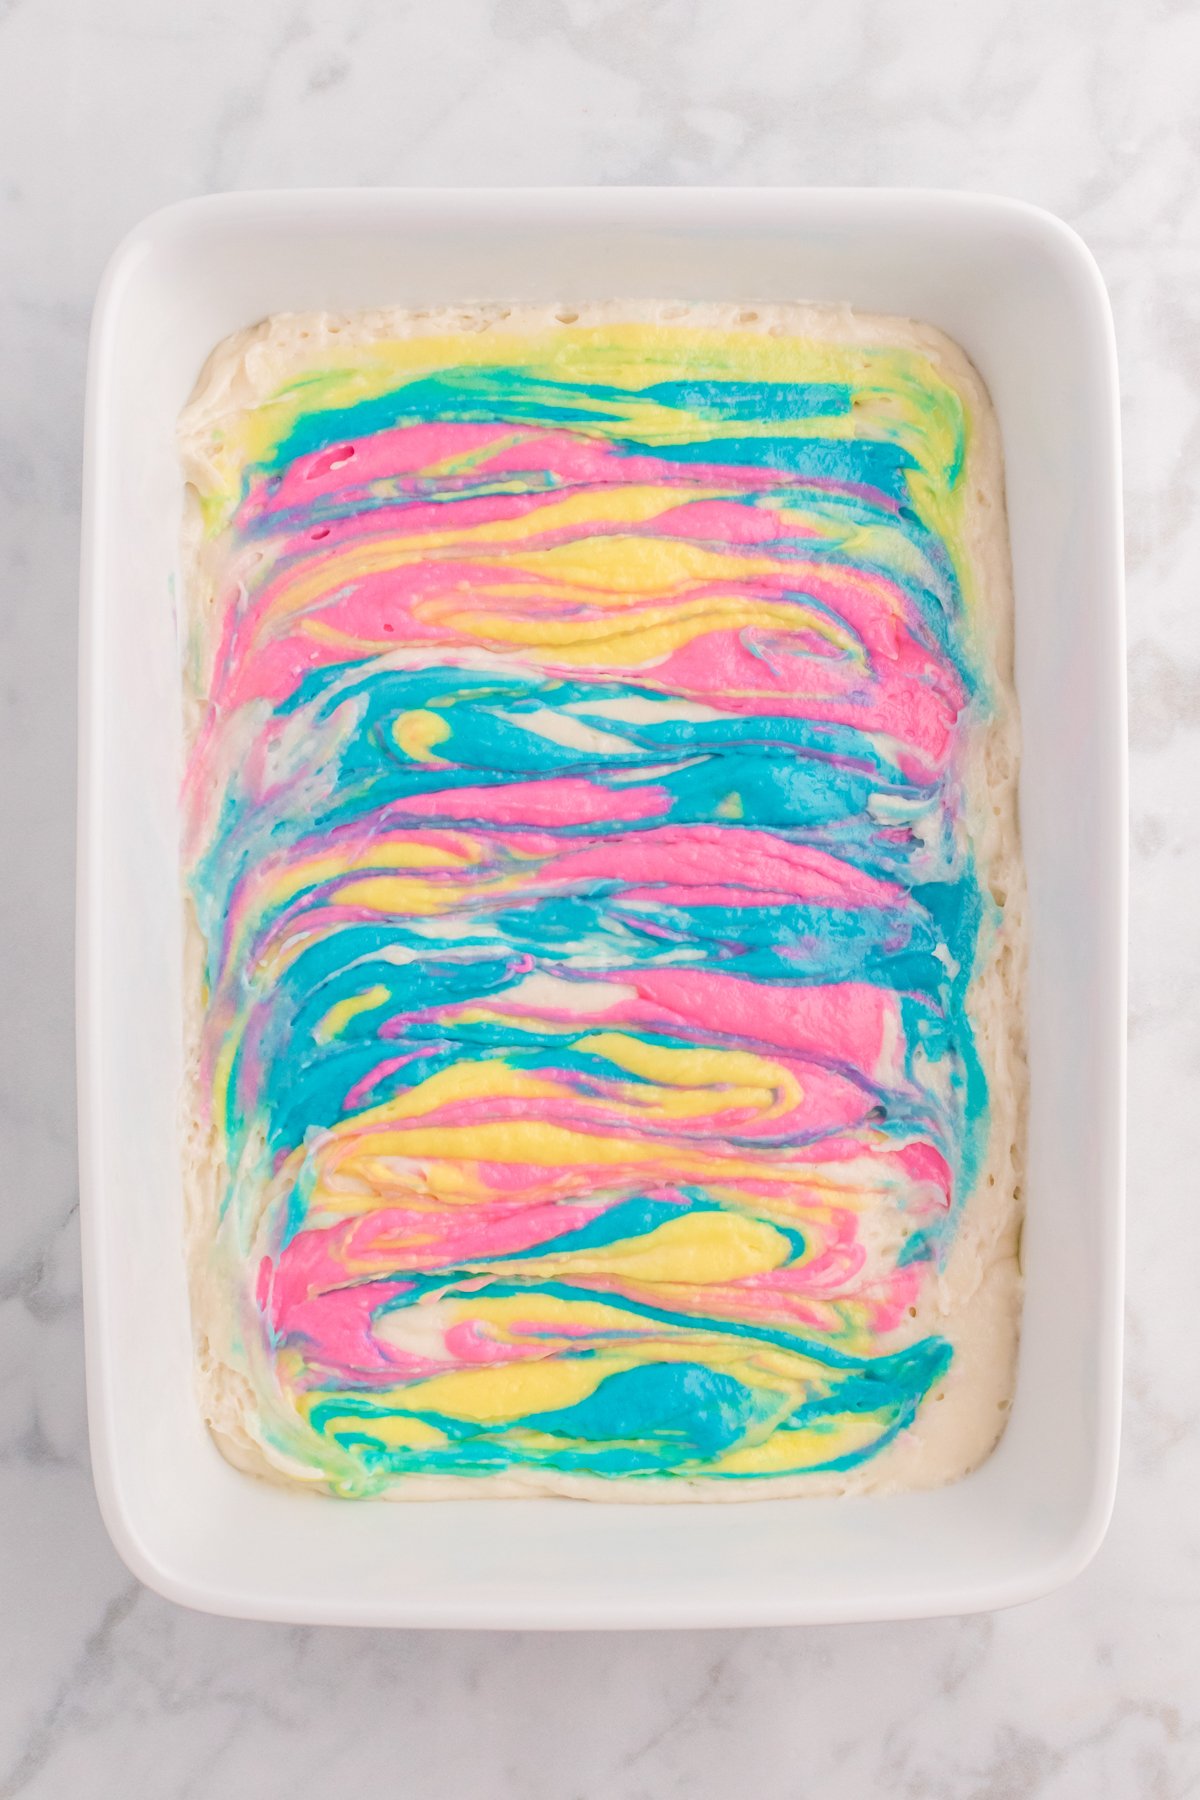 white cake pan with a swirled Easter cake inside